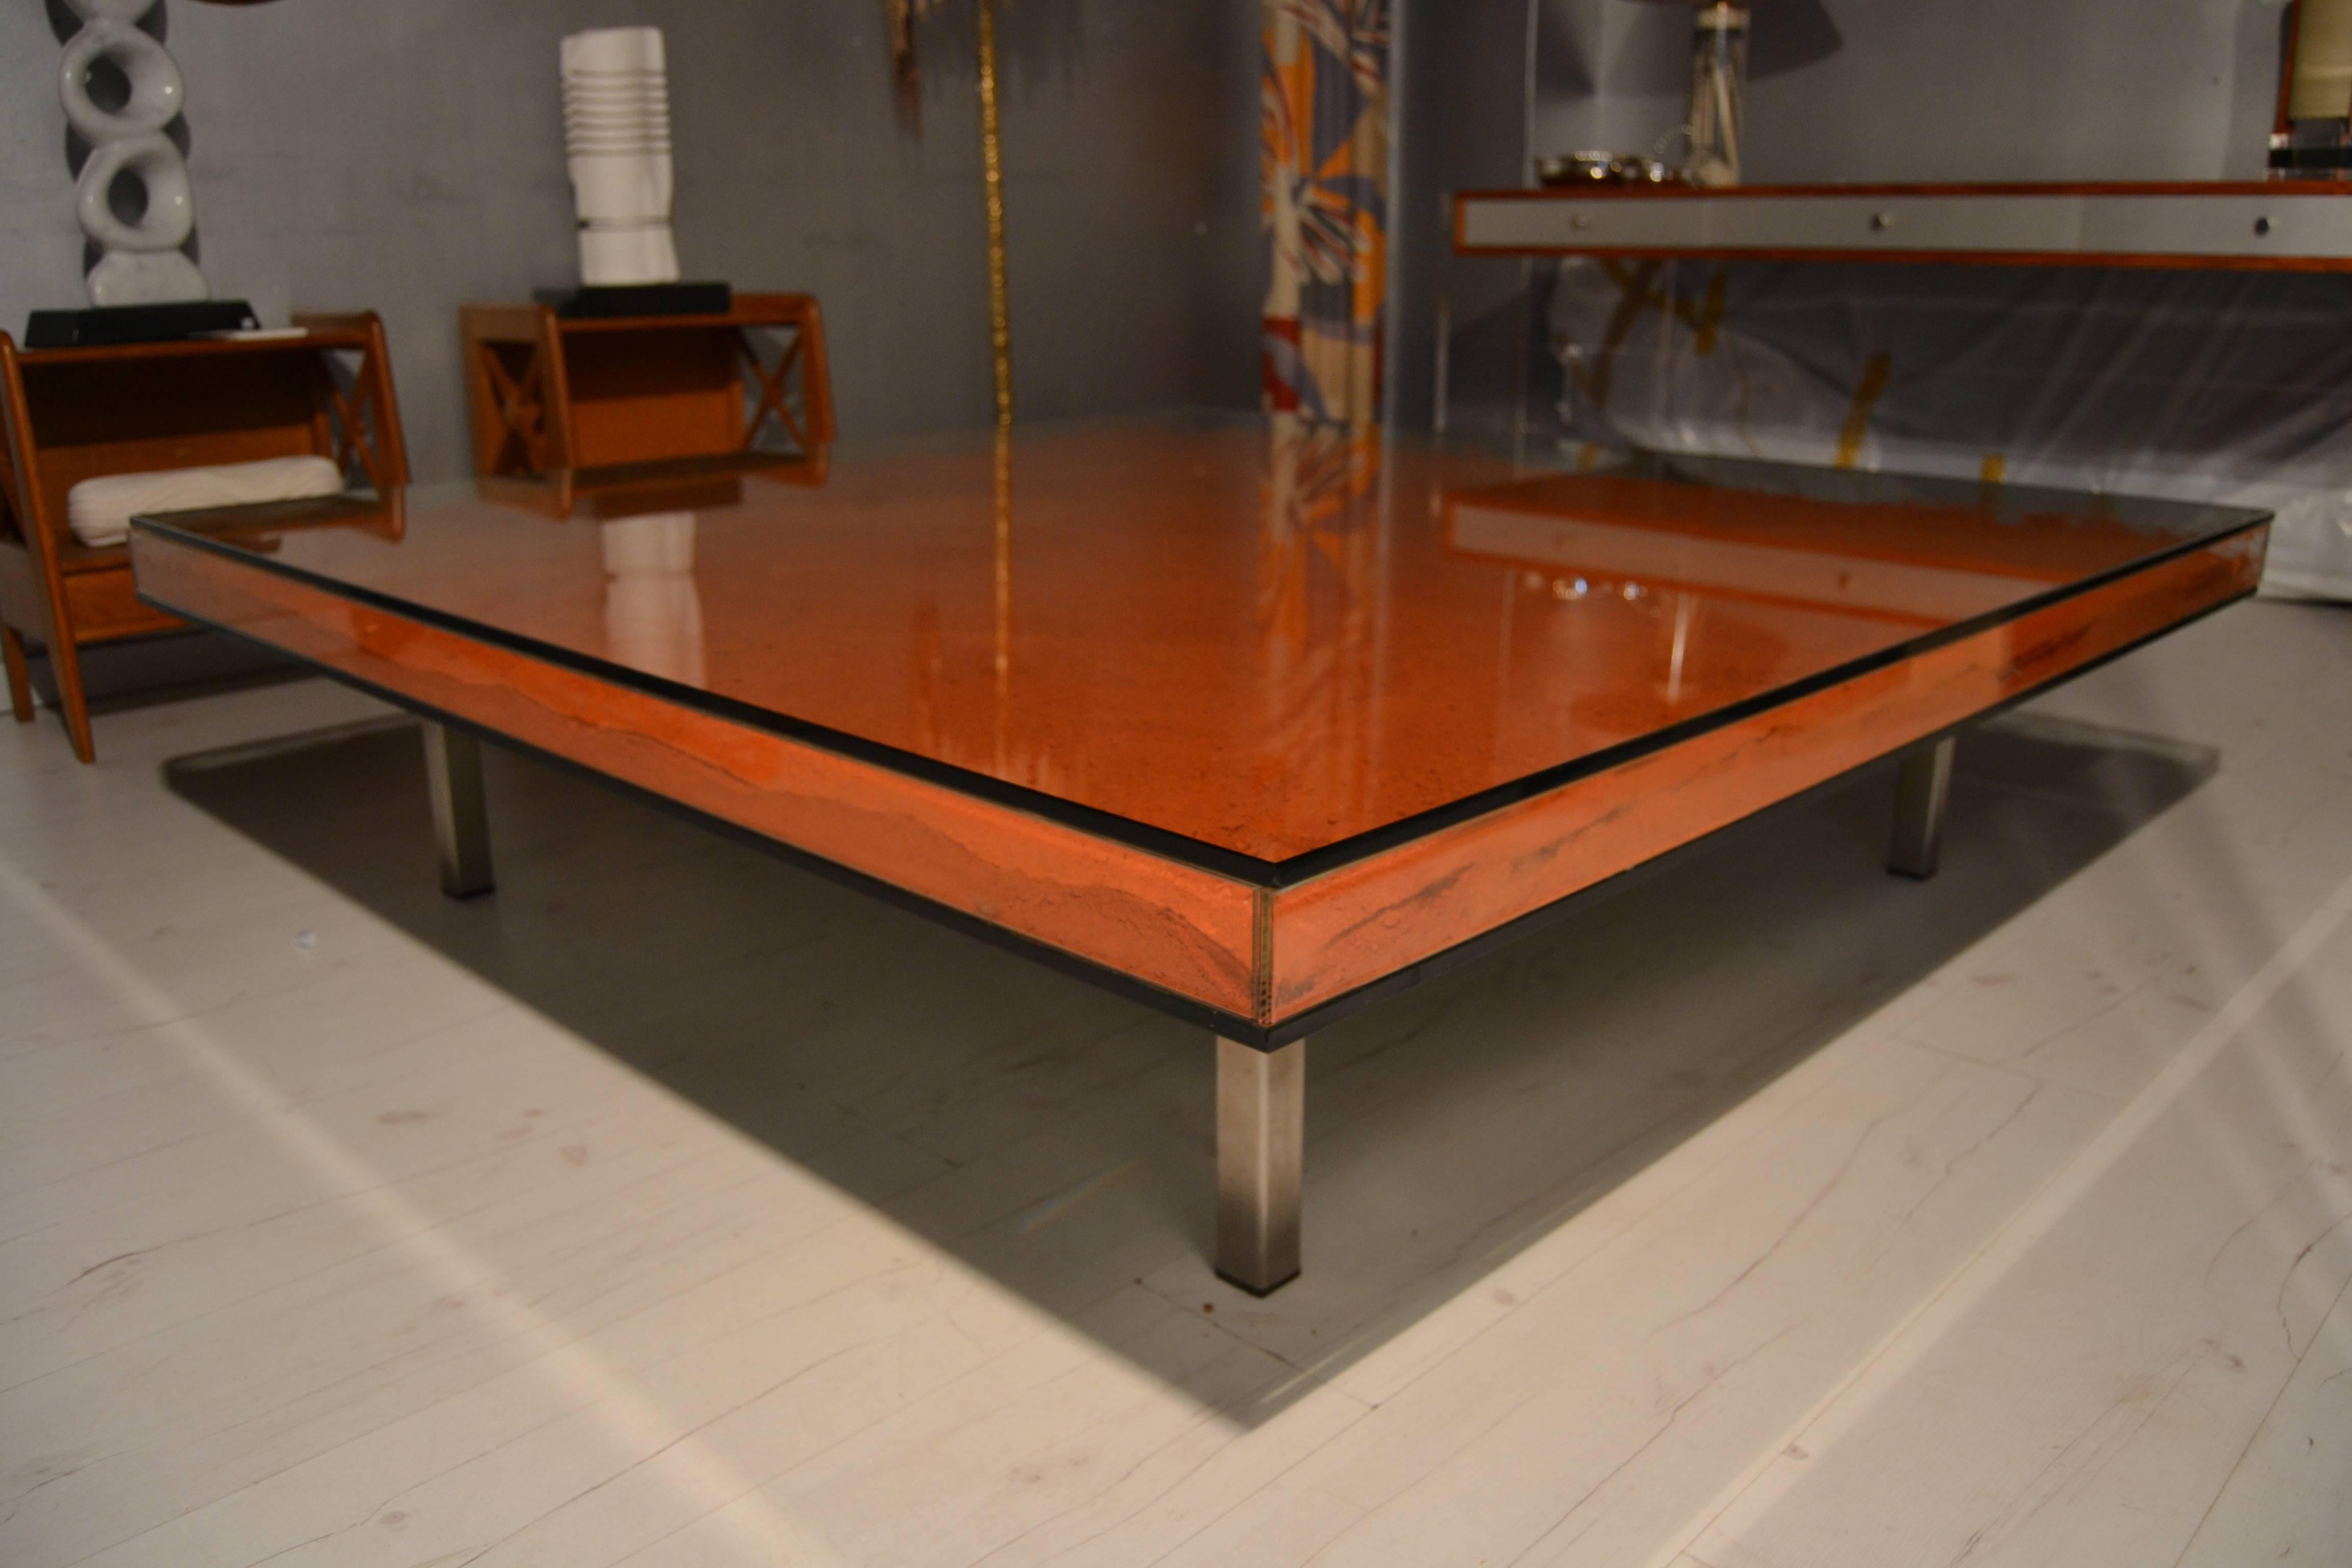 Large coffee table in glass with clay color pigments inside. This table remains the works of Yves Klein in 1960s.